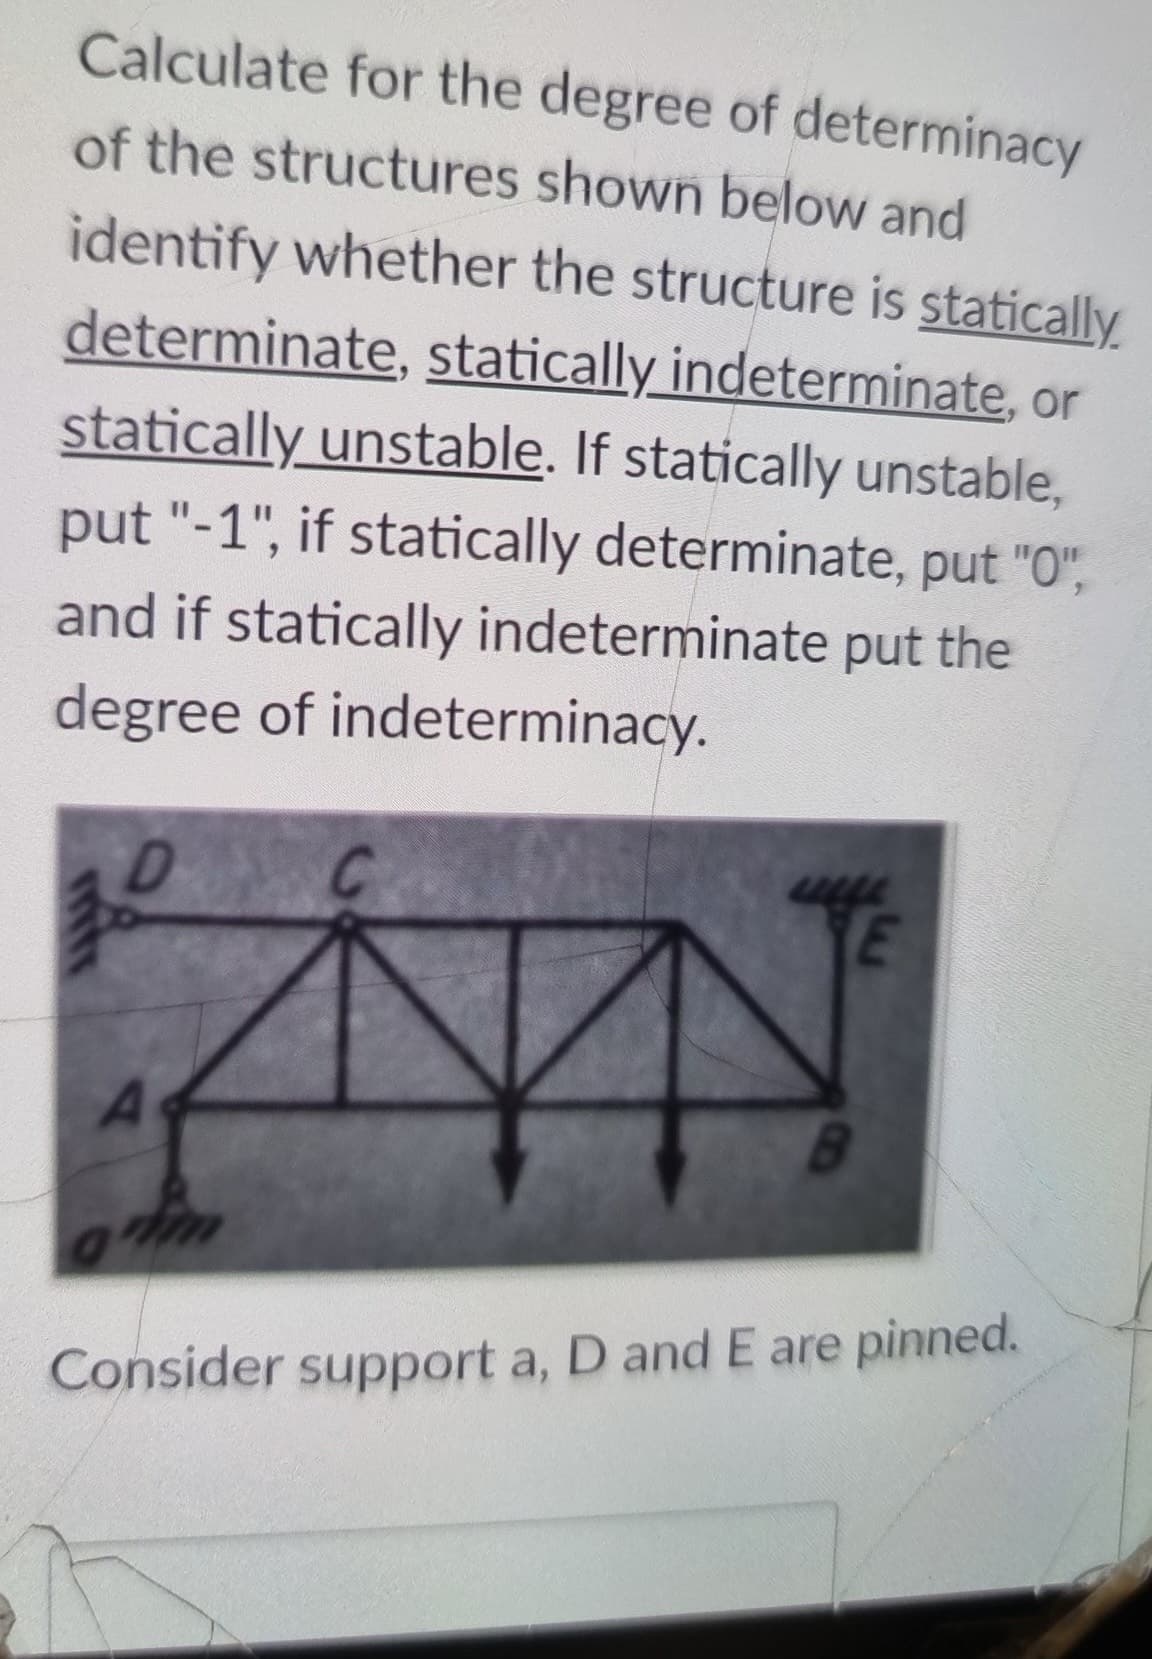 Calculate for the degree of determinacy
of the structures shown below and
identify whether the structure is statically
determinate, statically indeterminate, or
statically unstable. If statically unstable,
put "-1", if statically determinate, put "O",
and if statically indeterminate put the
degree of indeterminacy.
YE
A
B.
Consider support a, D and E are pinned.
